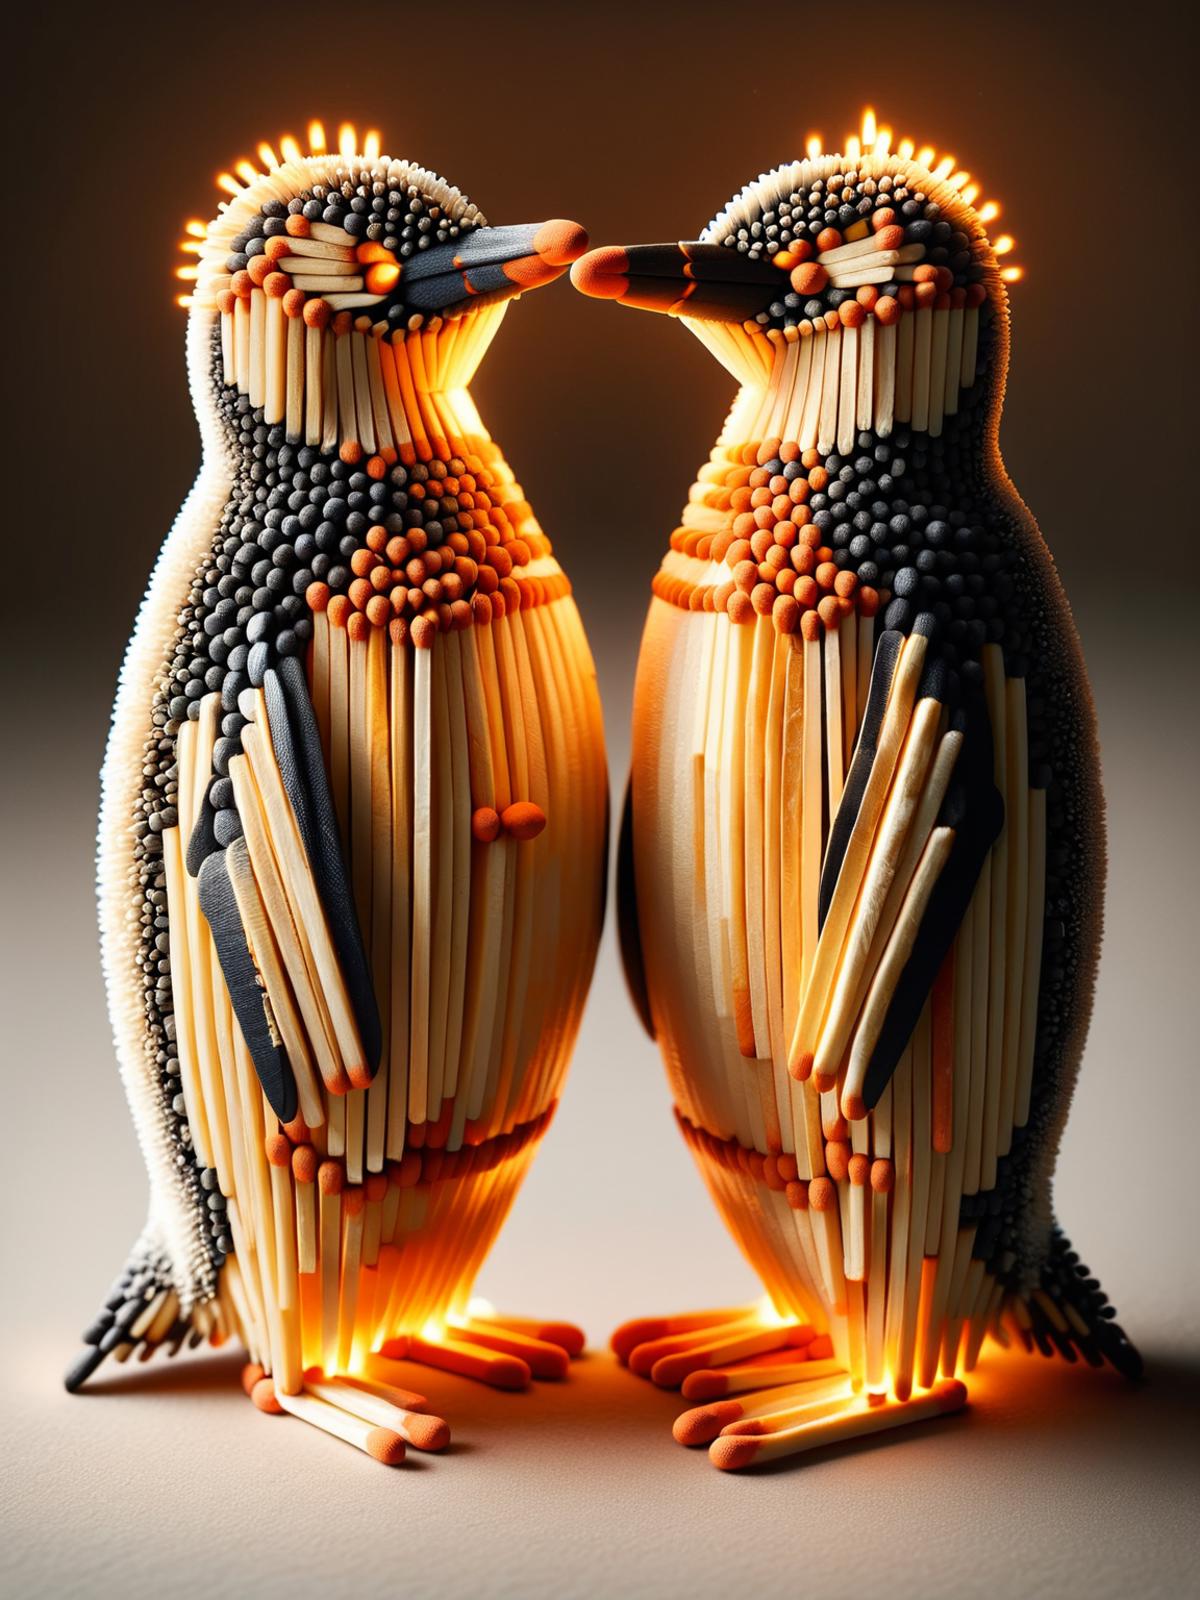 Two Penguins Made of Pencils Standing Together